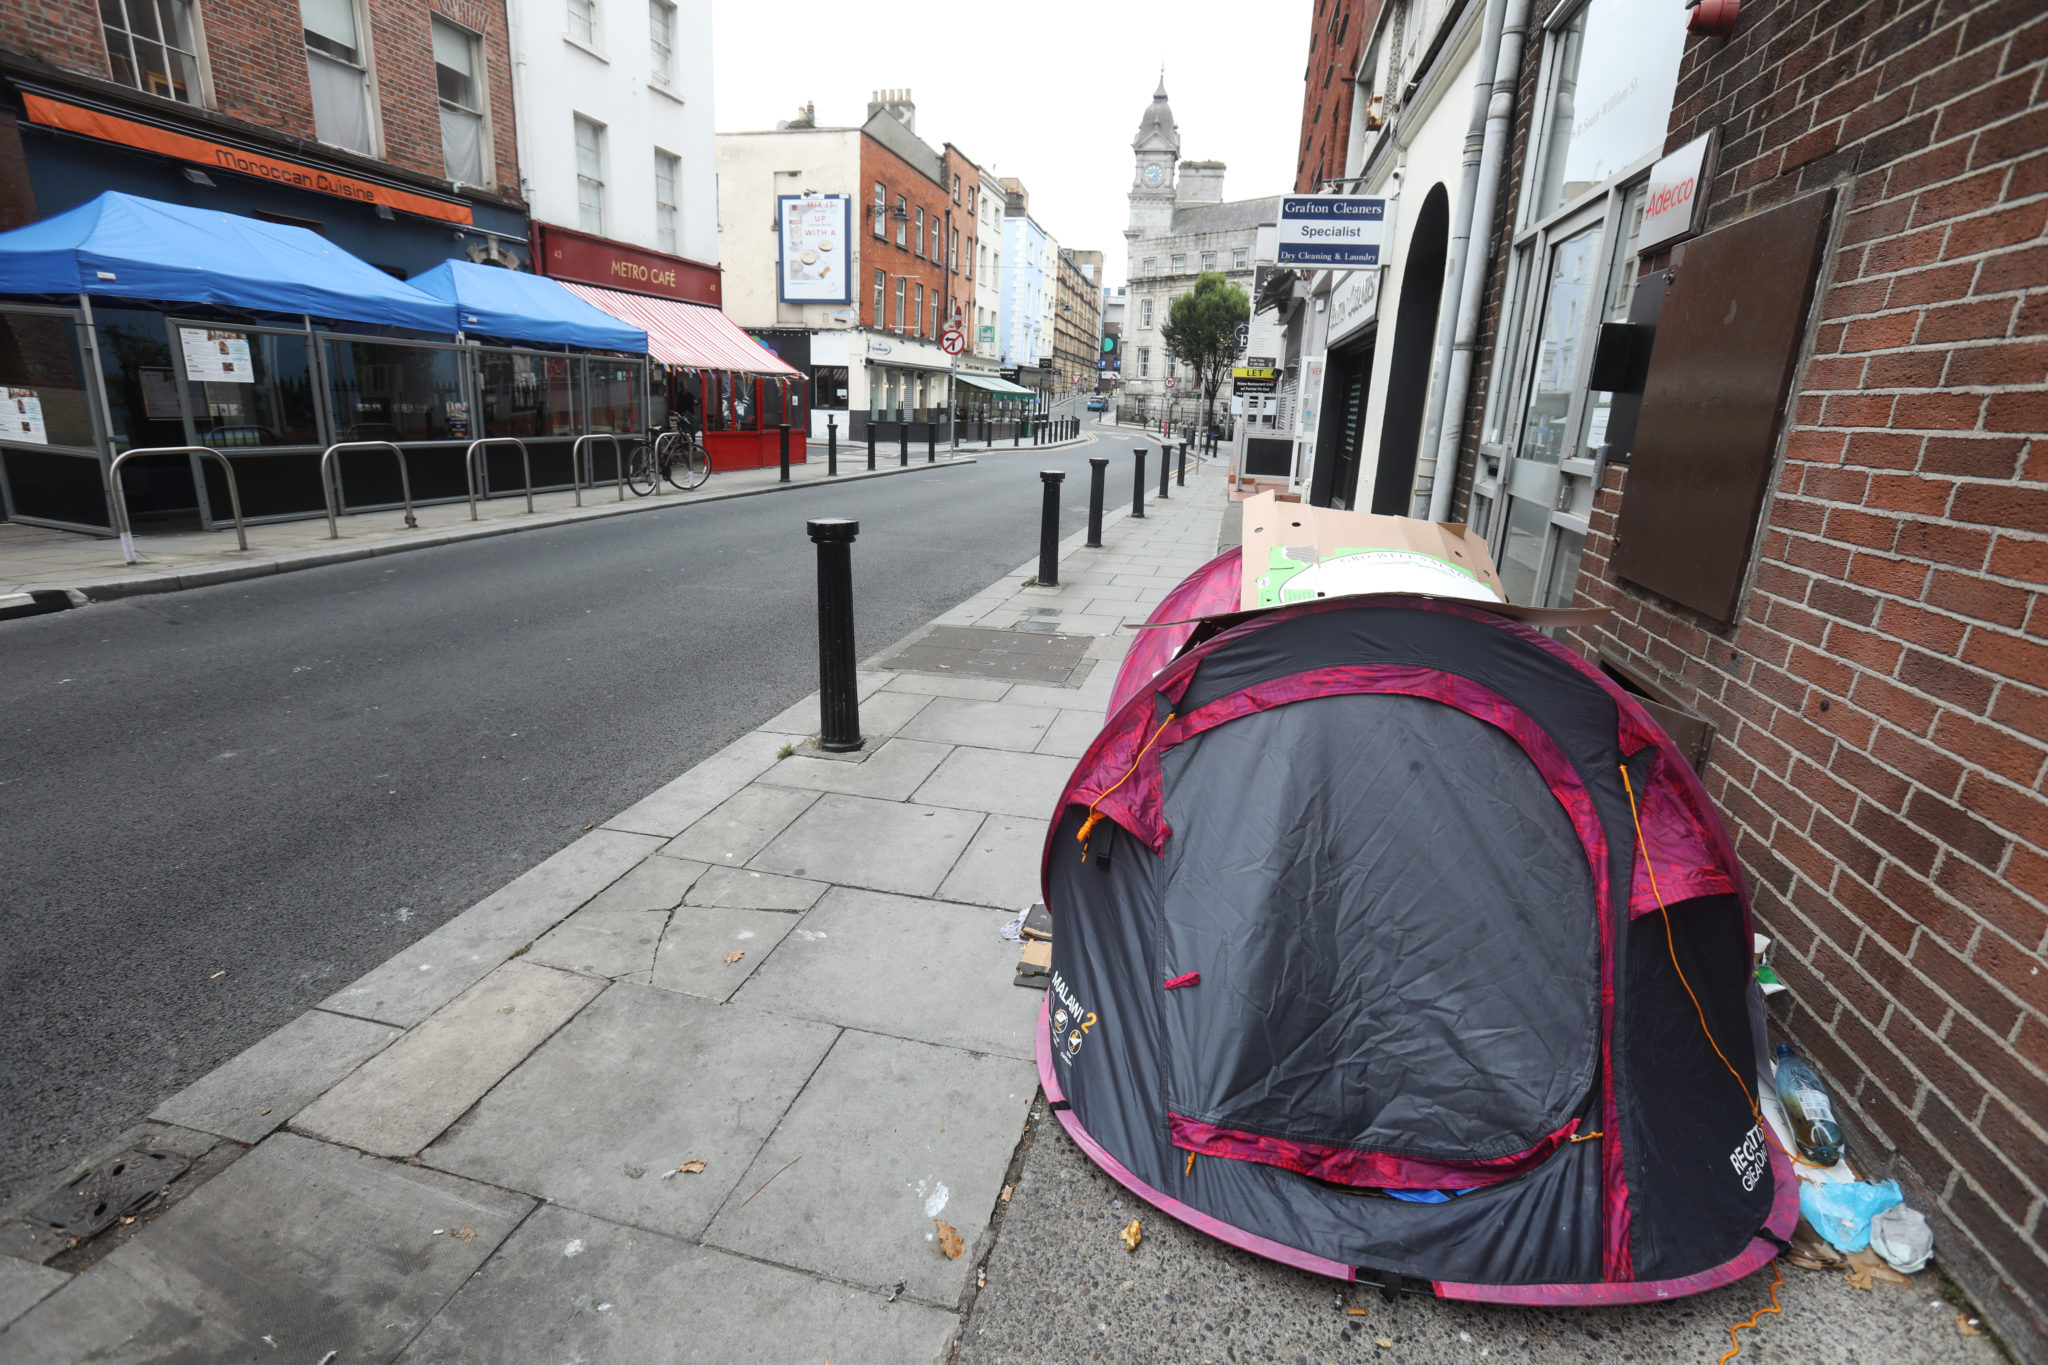 The tent of a homeless person living on the streets of Dublin City. Credit: Leah Farrell/RollingNews.ie